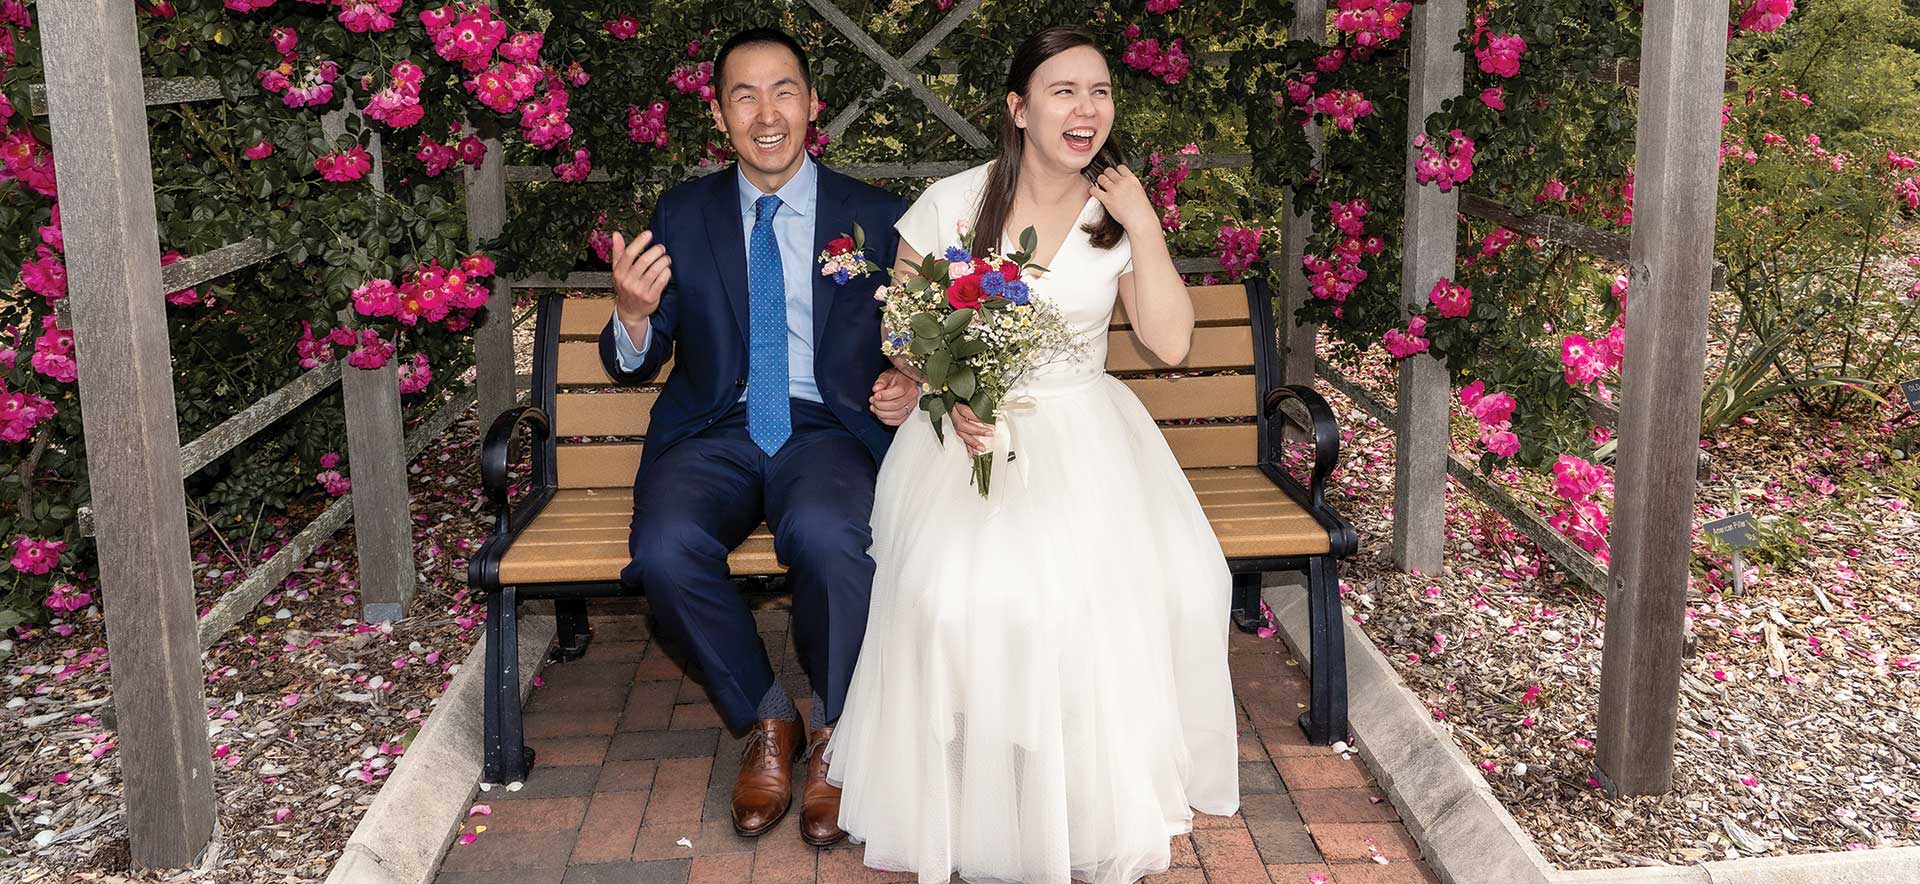 A bride and groom laugh while sitting on a bench surrounded by flowers